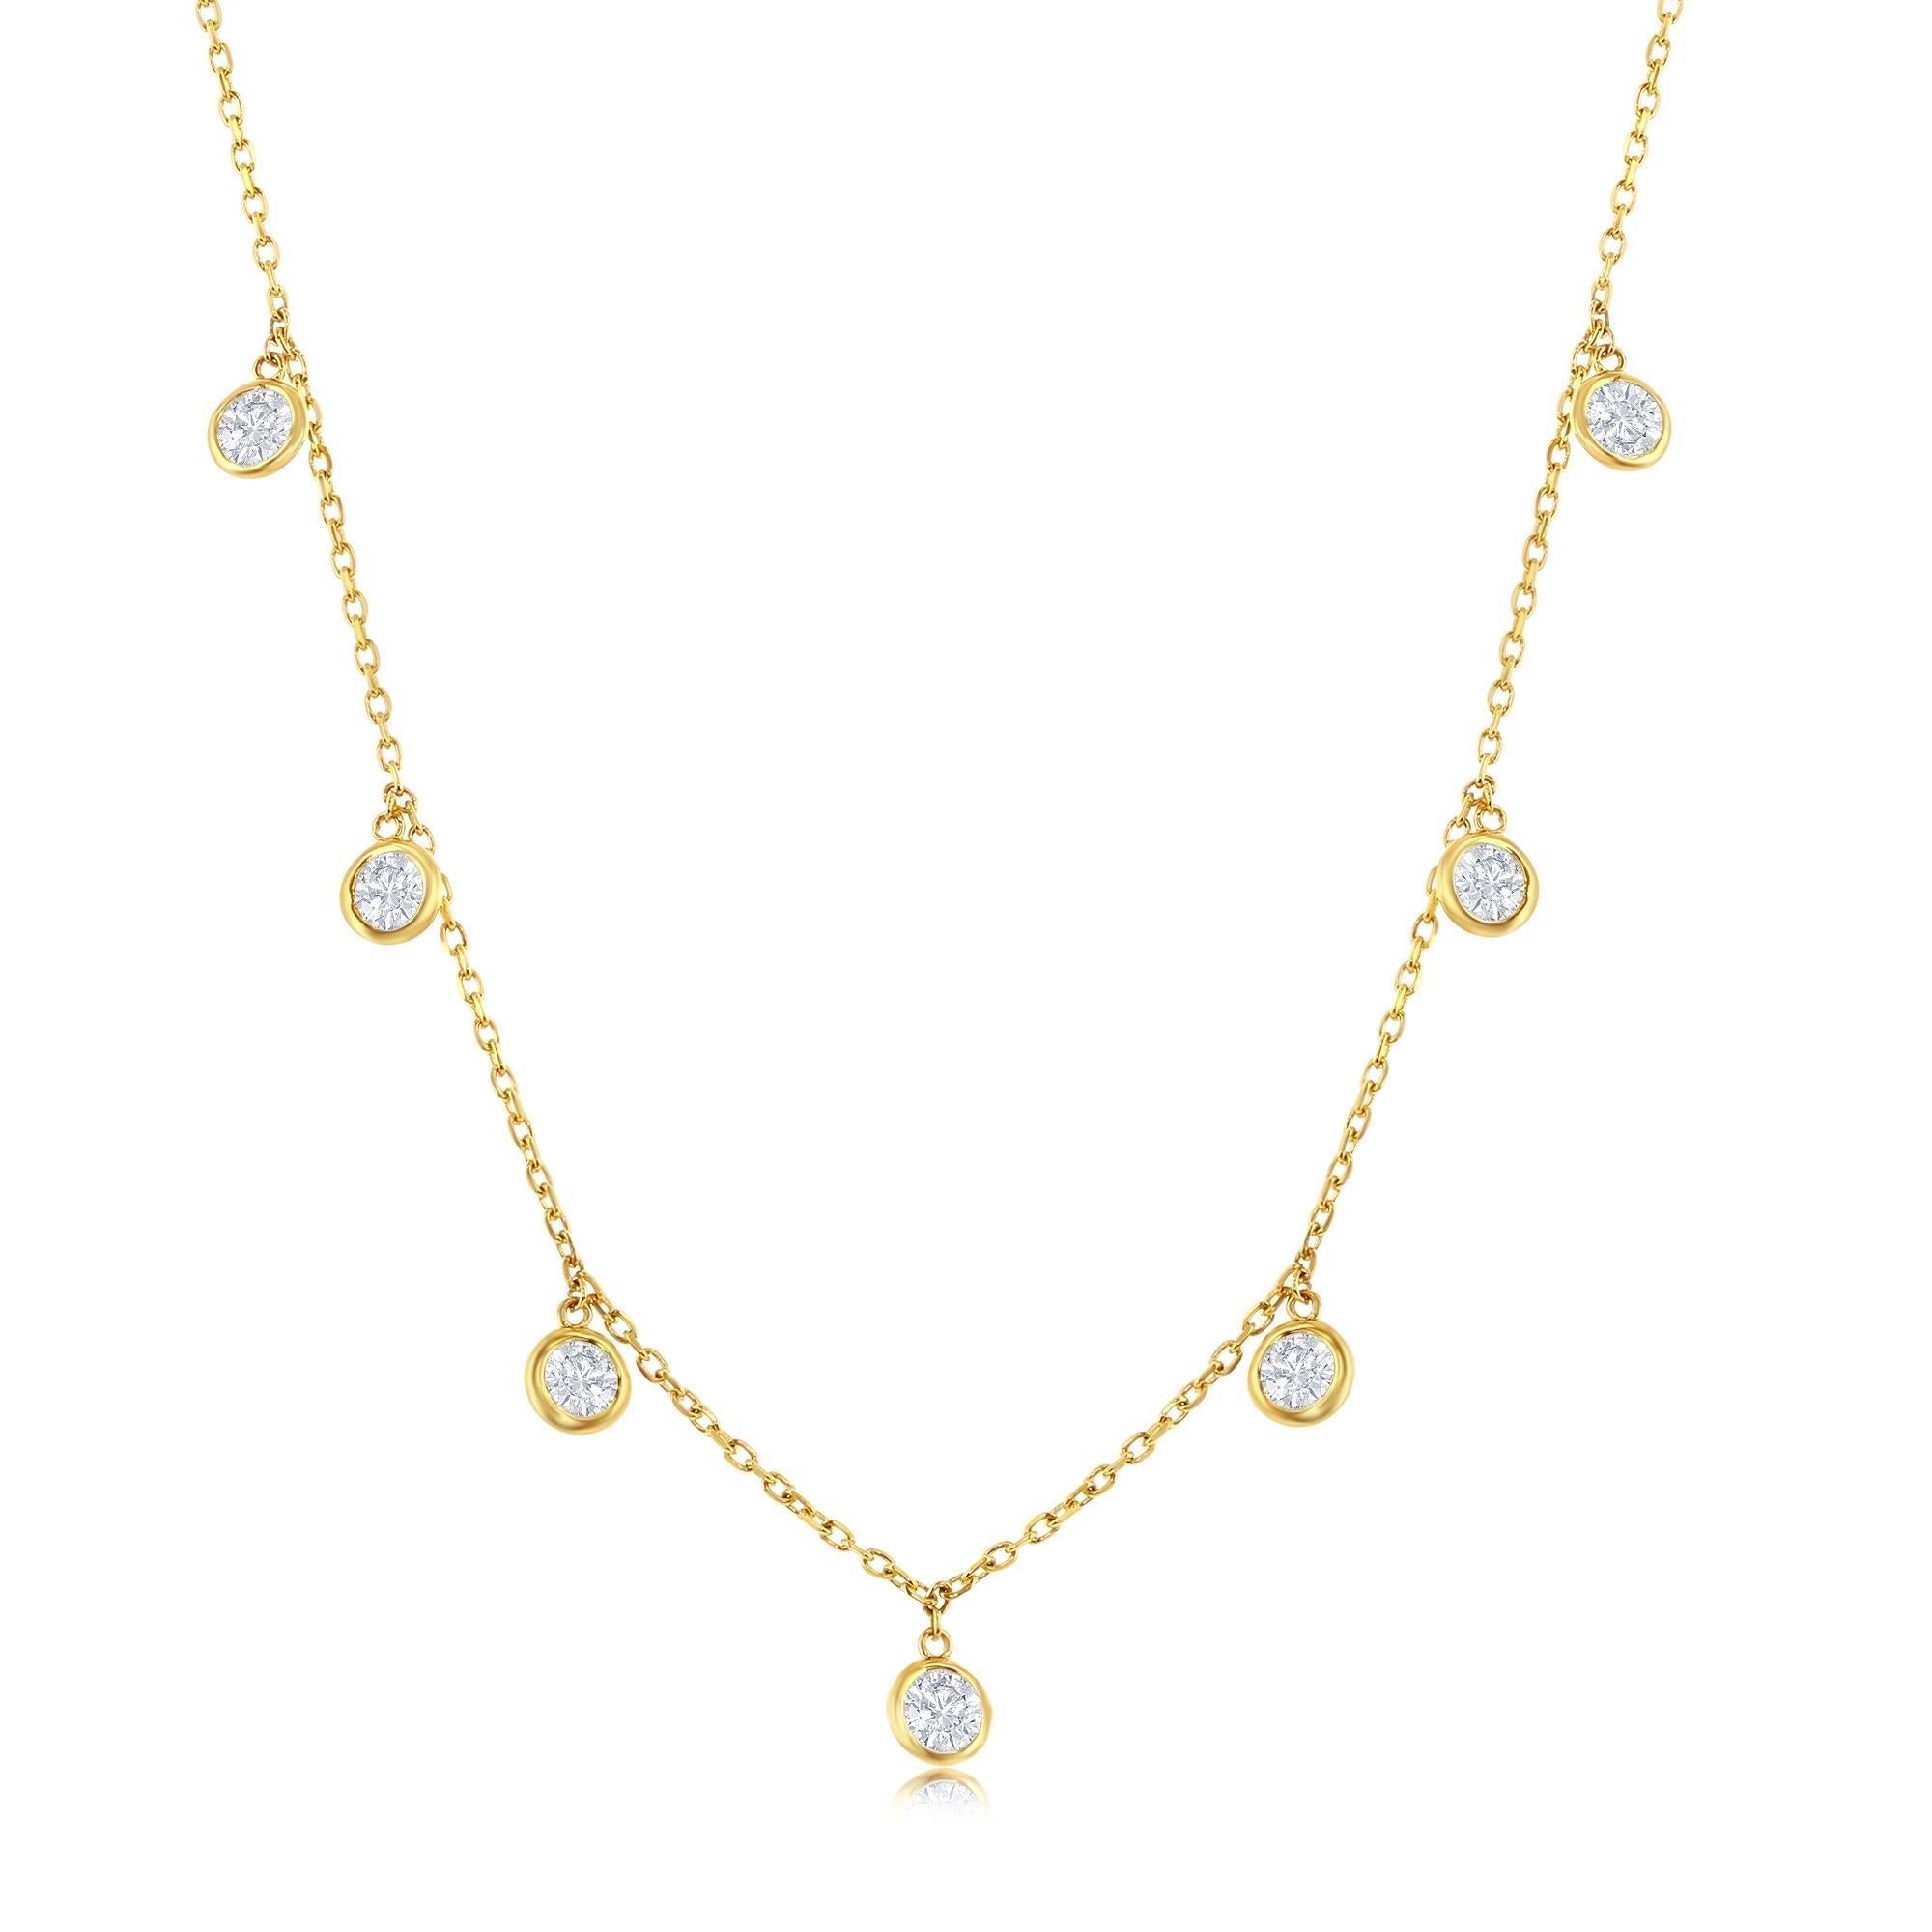 14K Yellow Gold Diamonds by the Yard Chain with 7 Dangle Natural Diamonds.
Classic Diamonds by the Yard Necklace/Chain with a special twist…All 7 Diamonds are Dangling.
Natural Full Cut Diamonds 
14K Yellow Gold
Number of Diamonds: 7
Total Diamonds